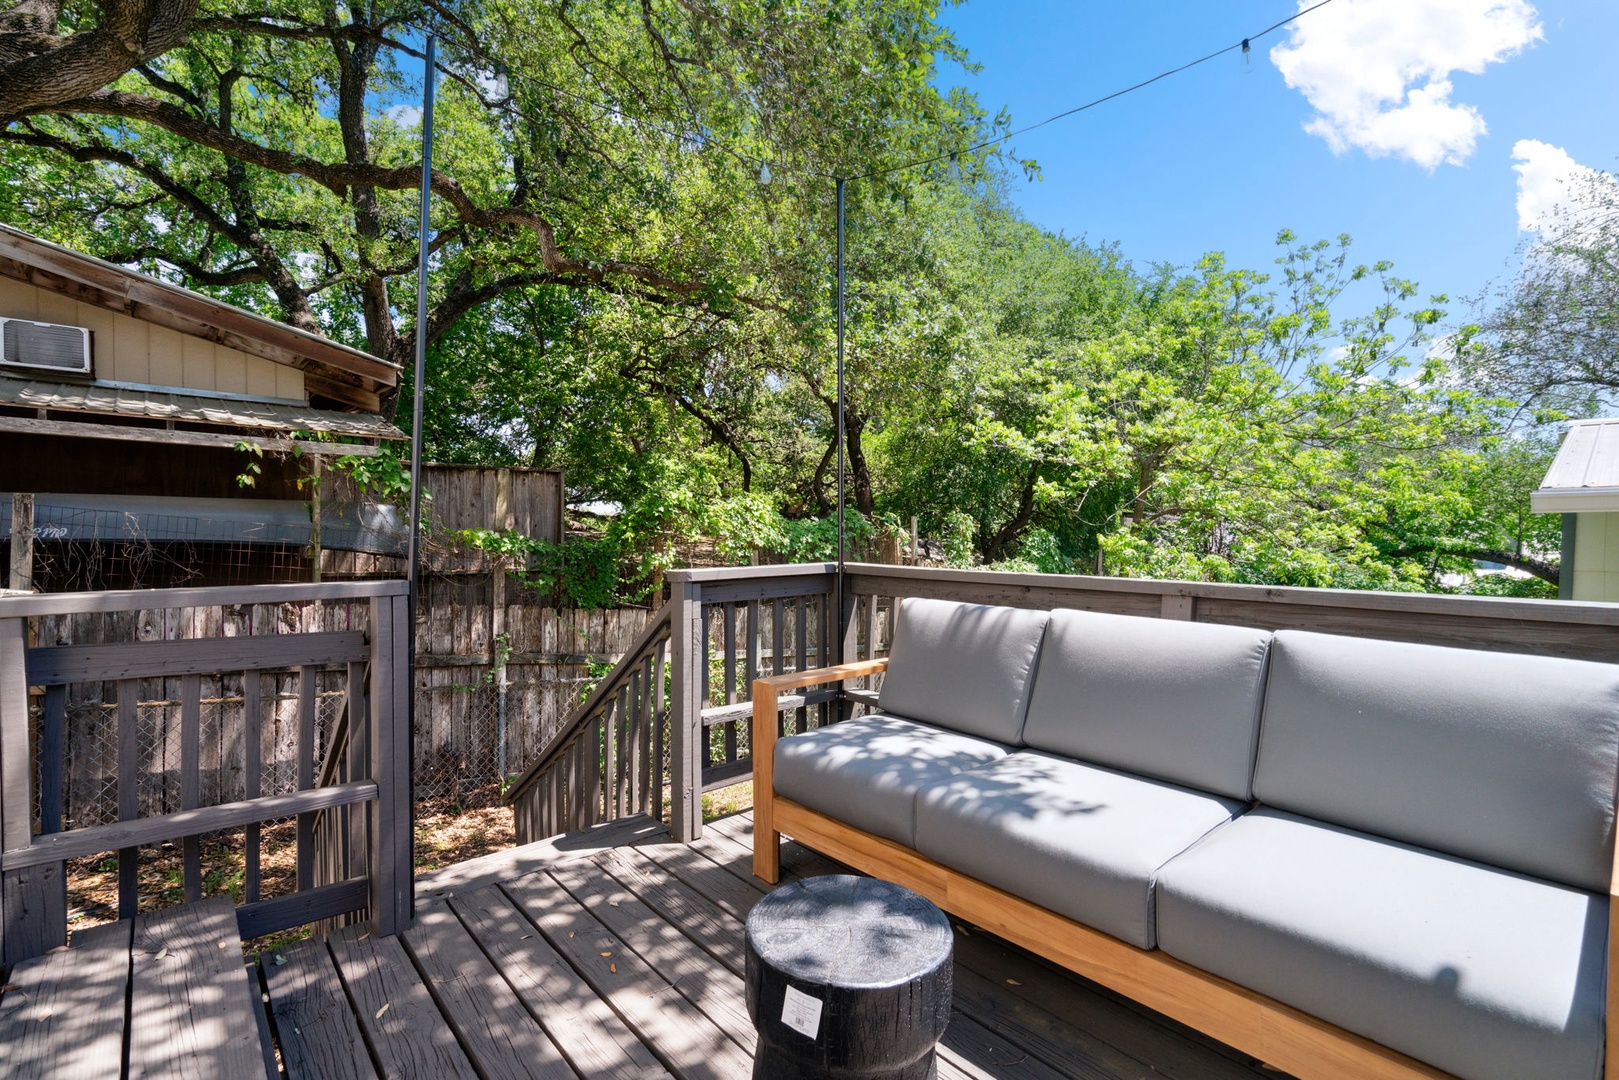 Kick back & relax in the sunshine on the cozy back deck!